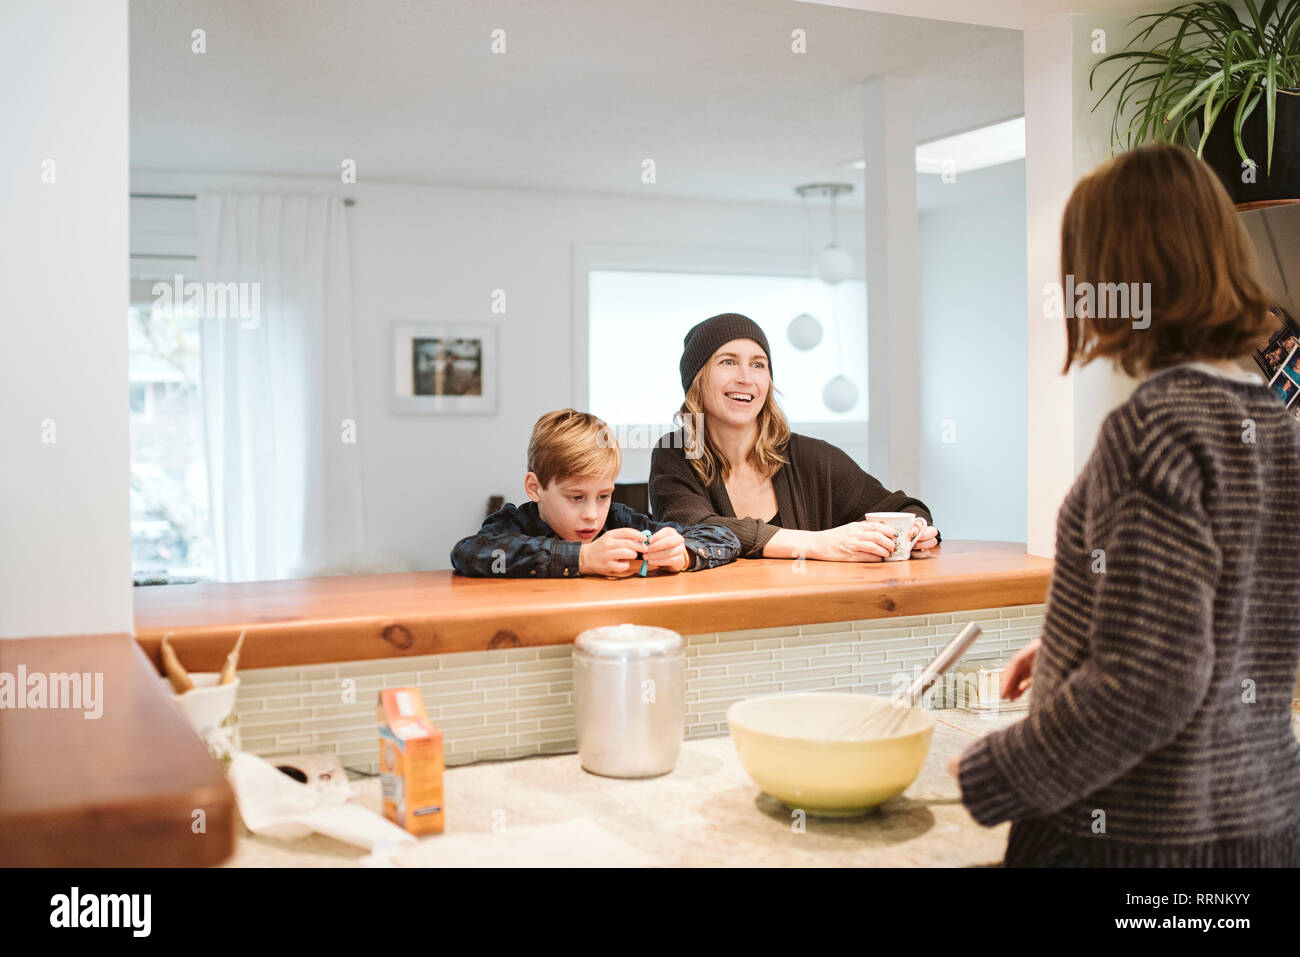 Family baking and talking in kitchen Stock Photo